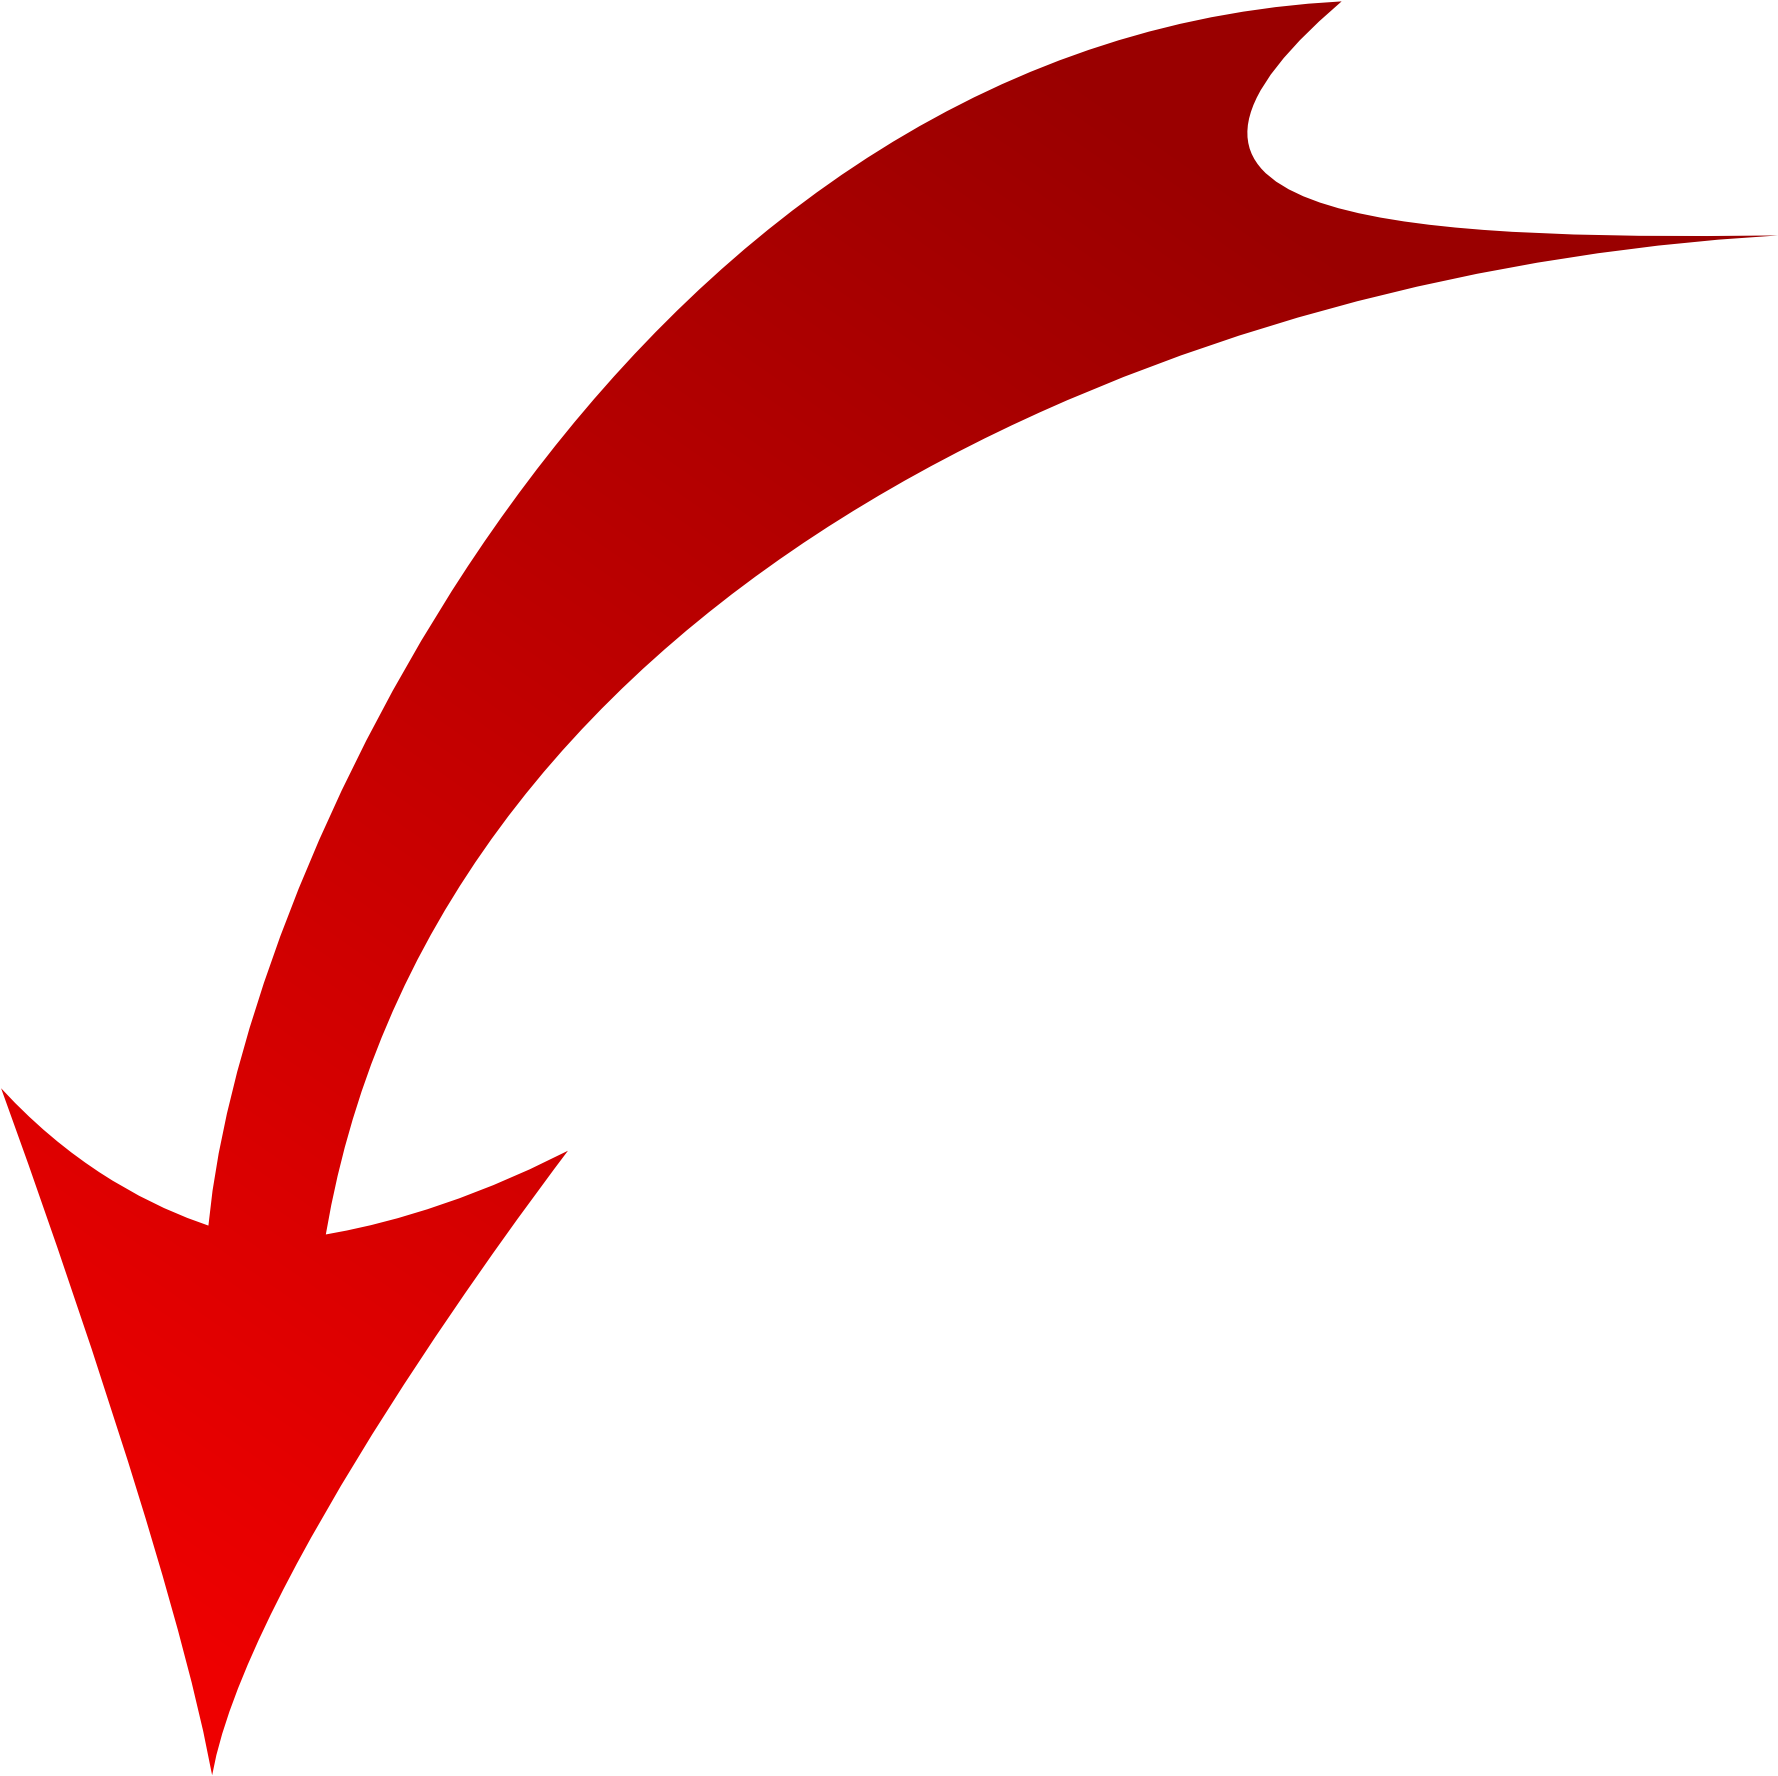 Curved Red Arrow Pointing Downward PNG